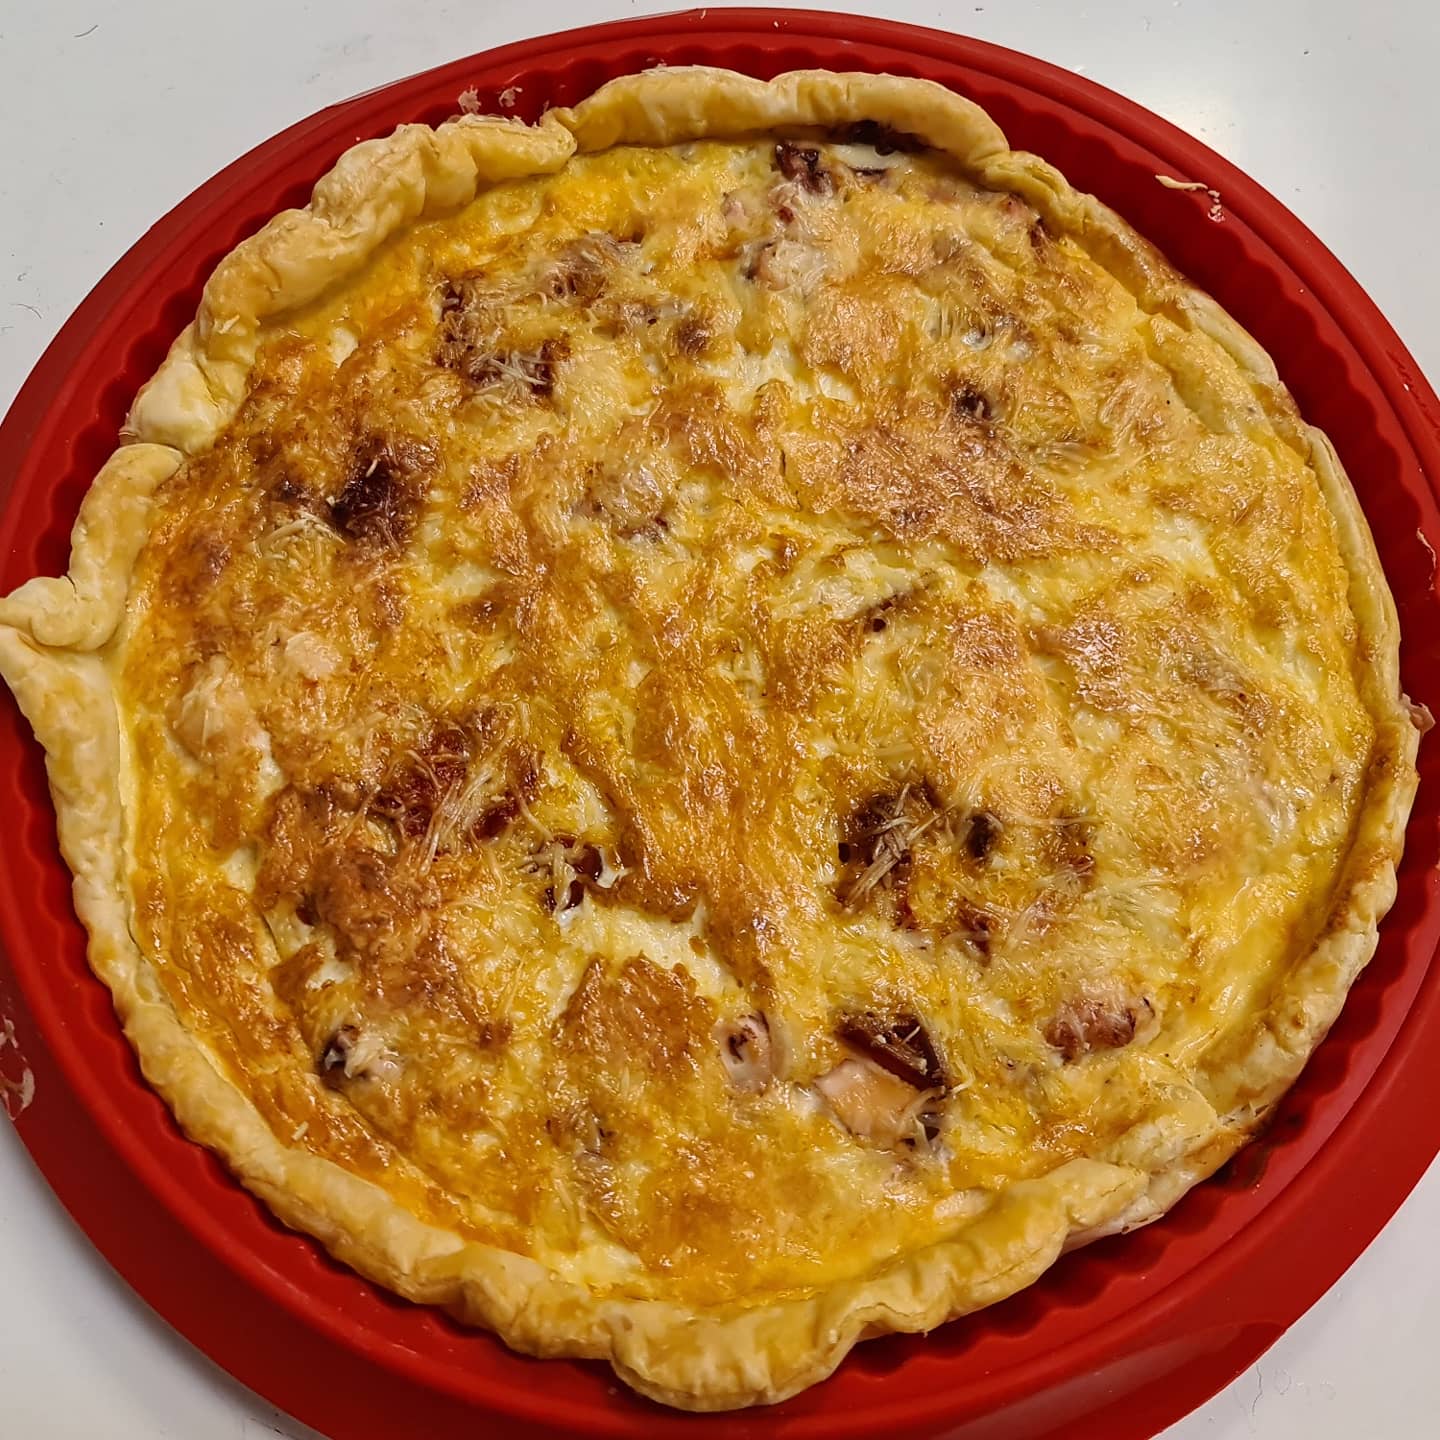 Octopus quiche finished